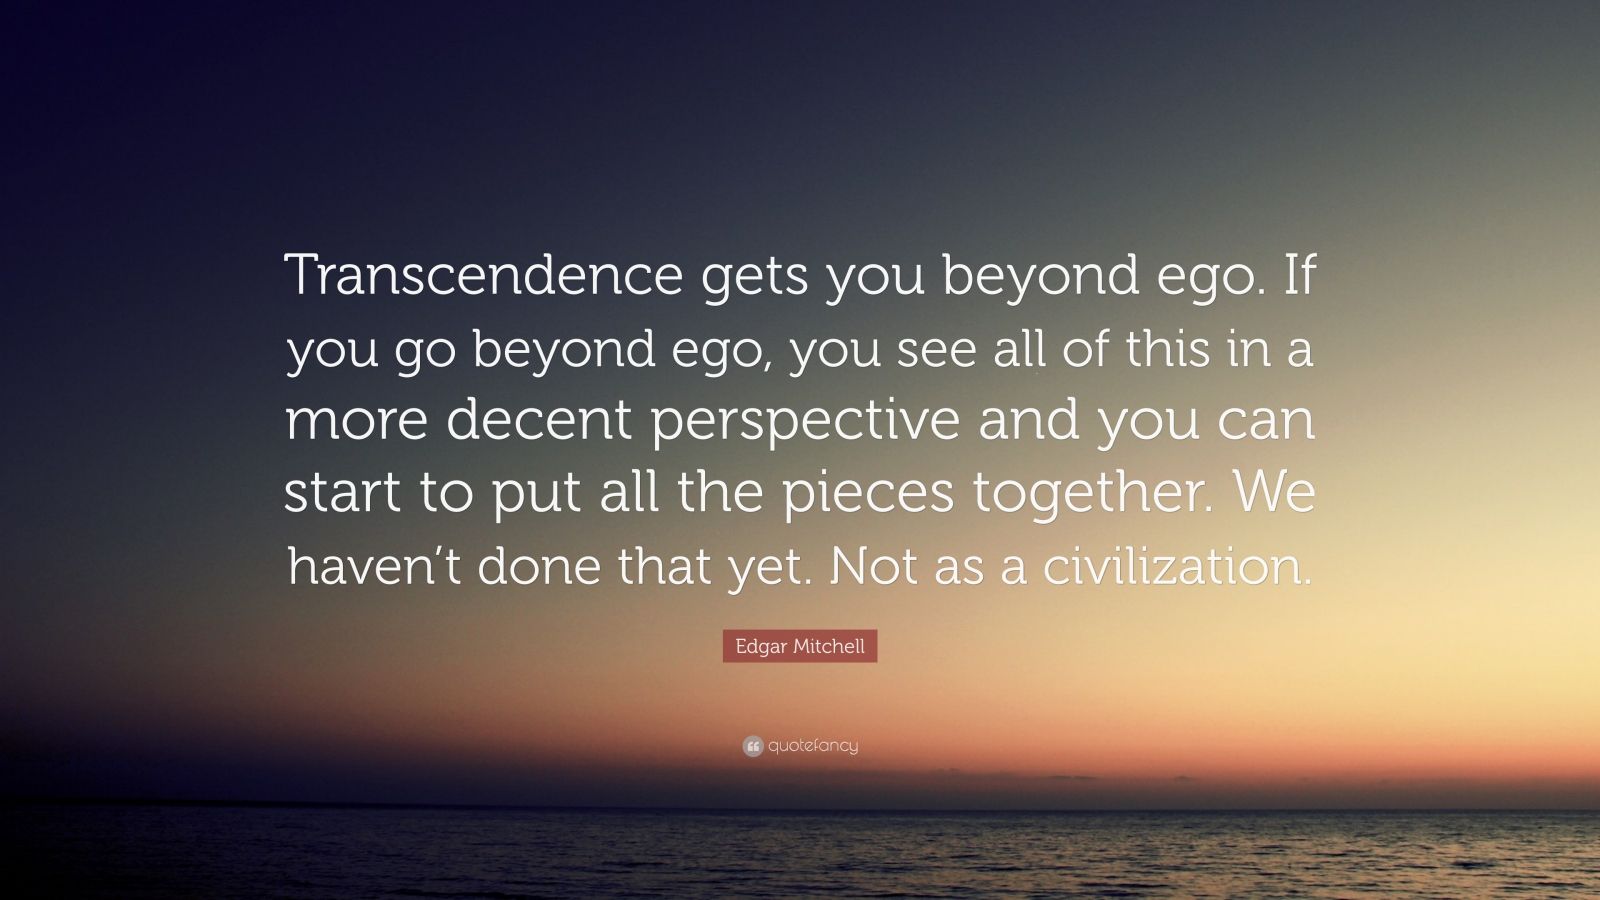 Edgar Mitchell Quote: "Transcendence gets you beyond ego. If you go beyond ego, you see all of ...